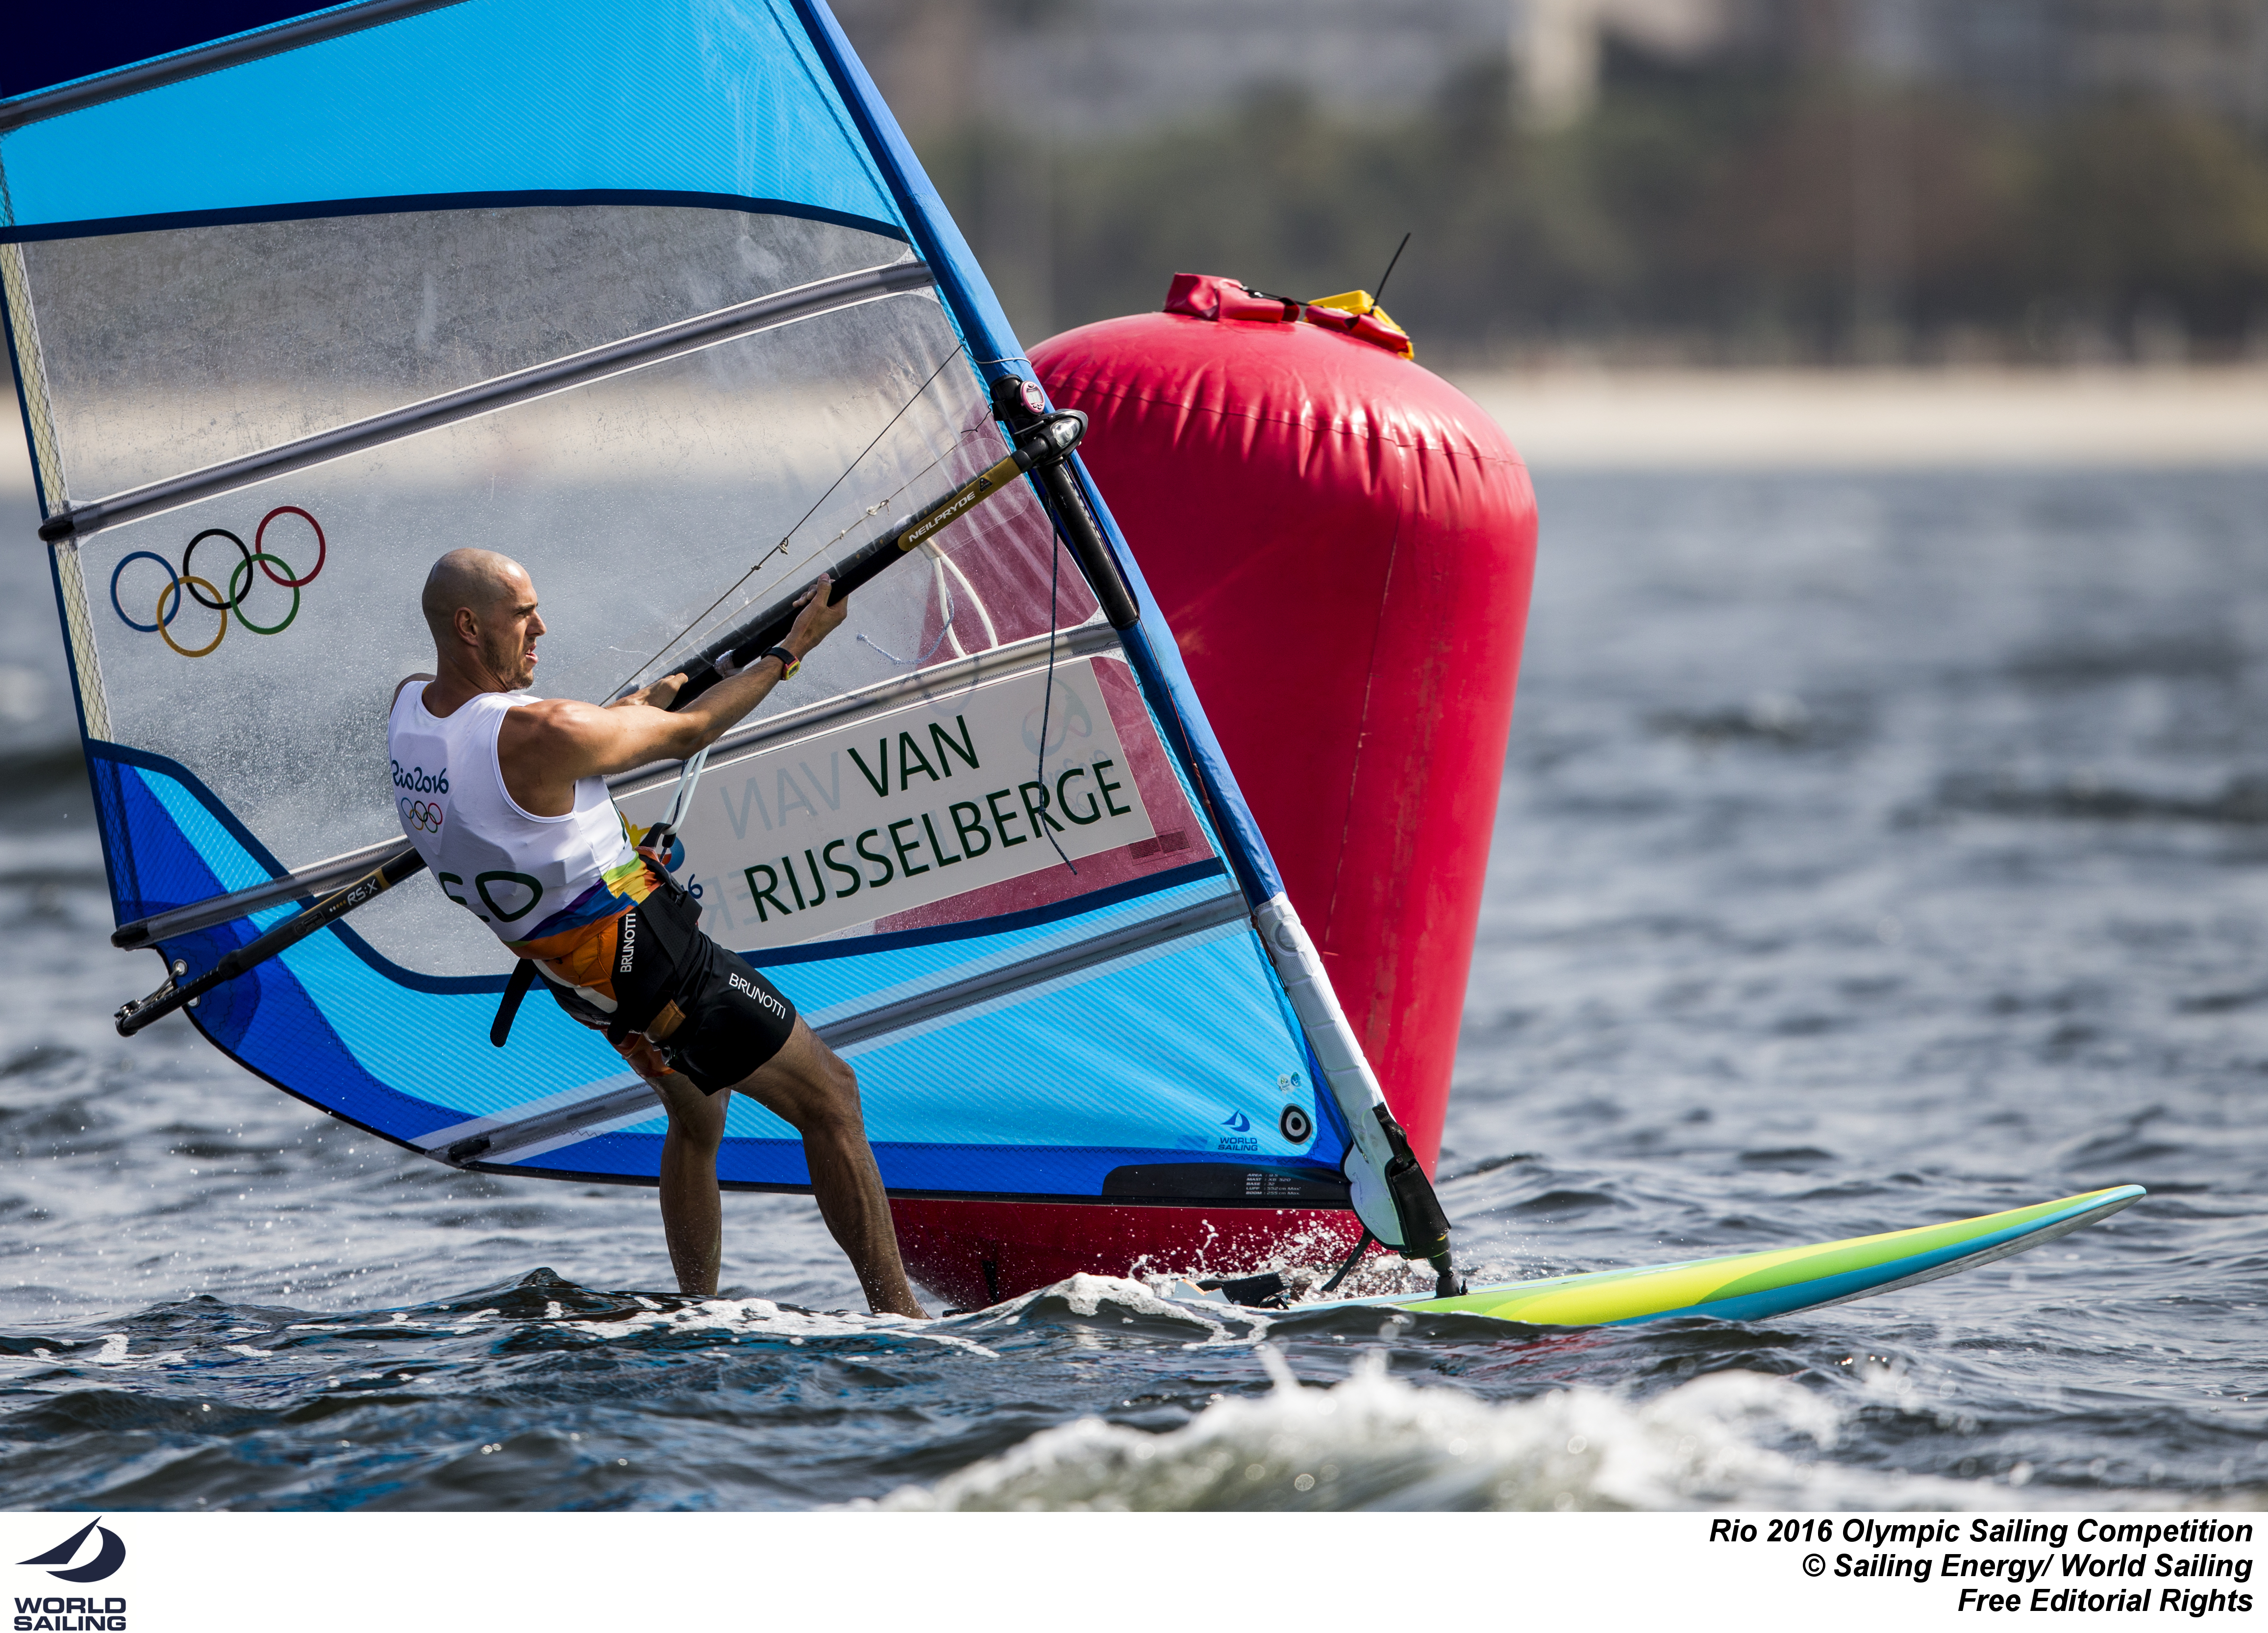 The Rio 2016 Olympic Sailing Competition © Sailing Energy / World Sailing